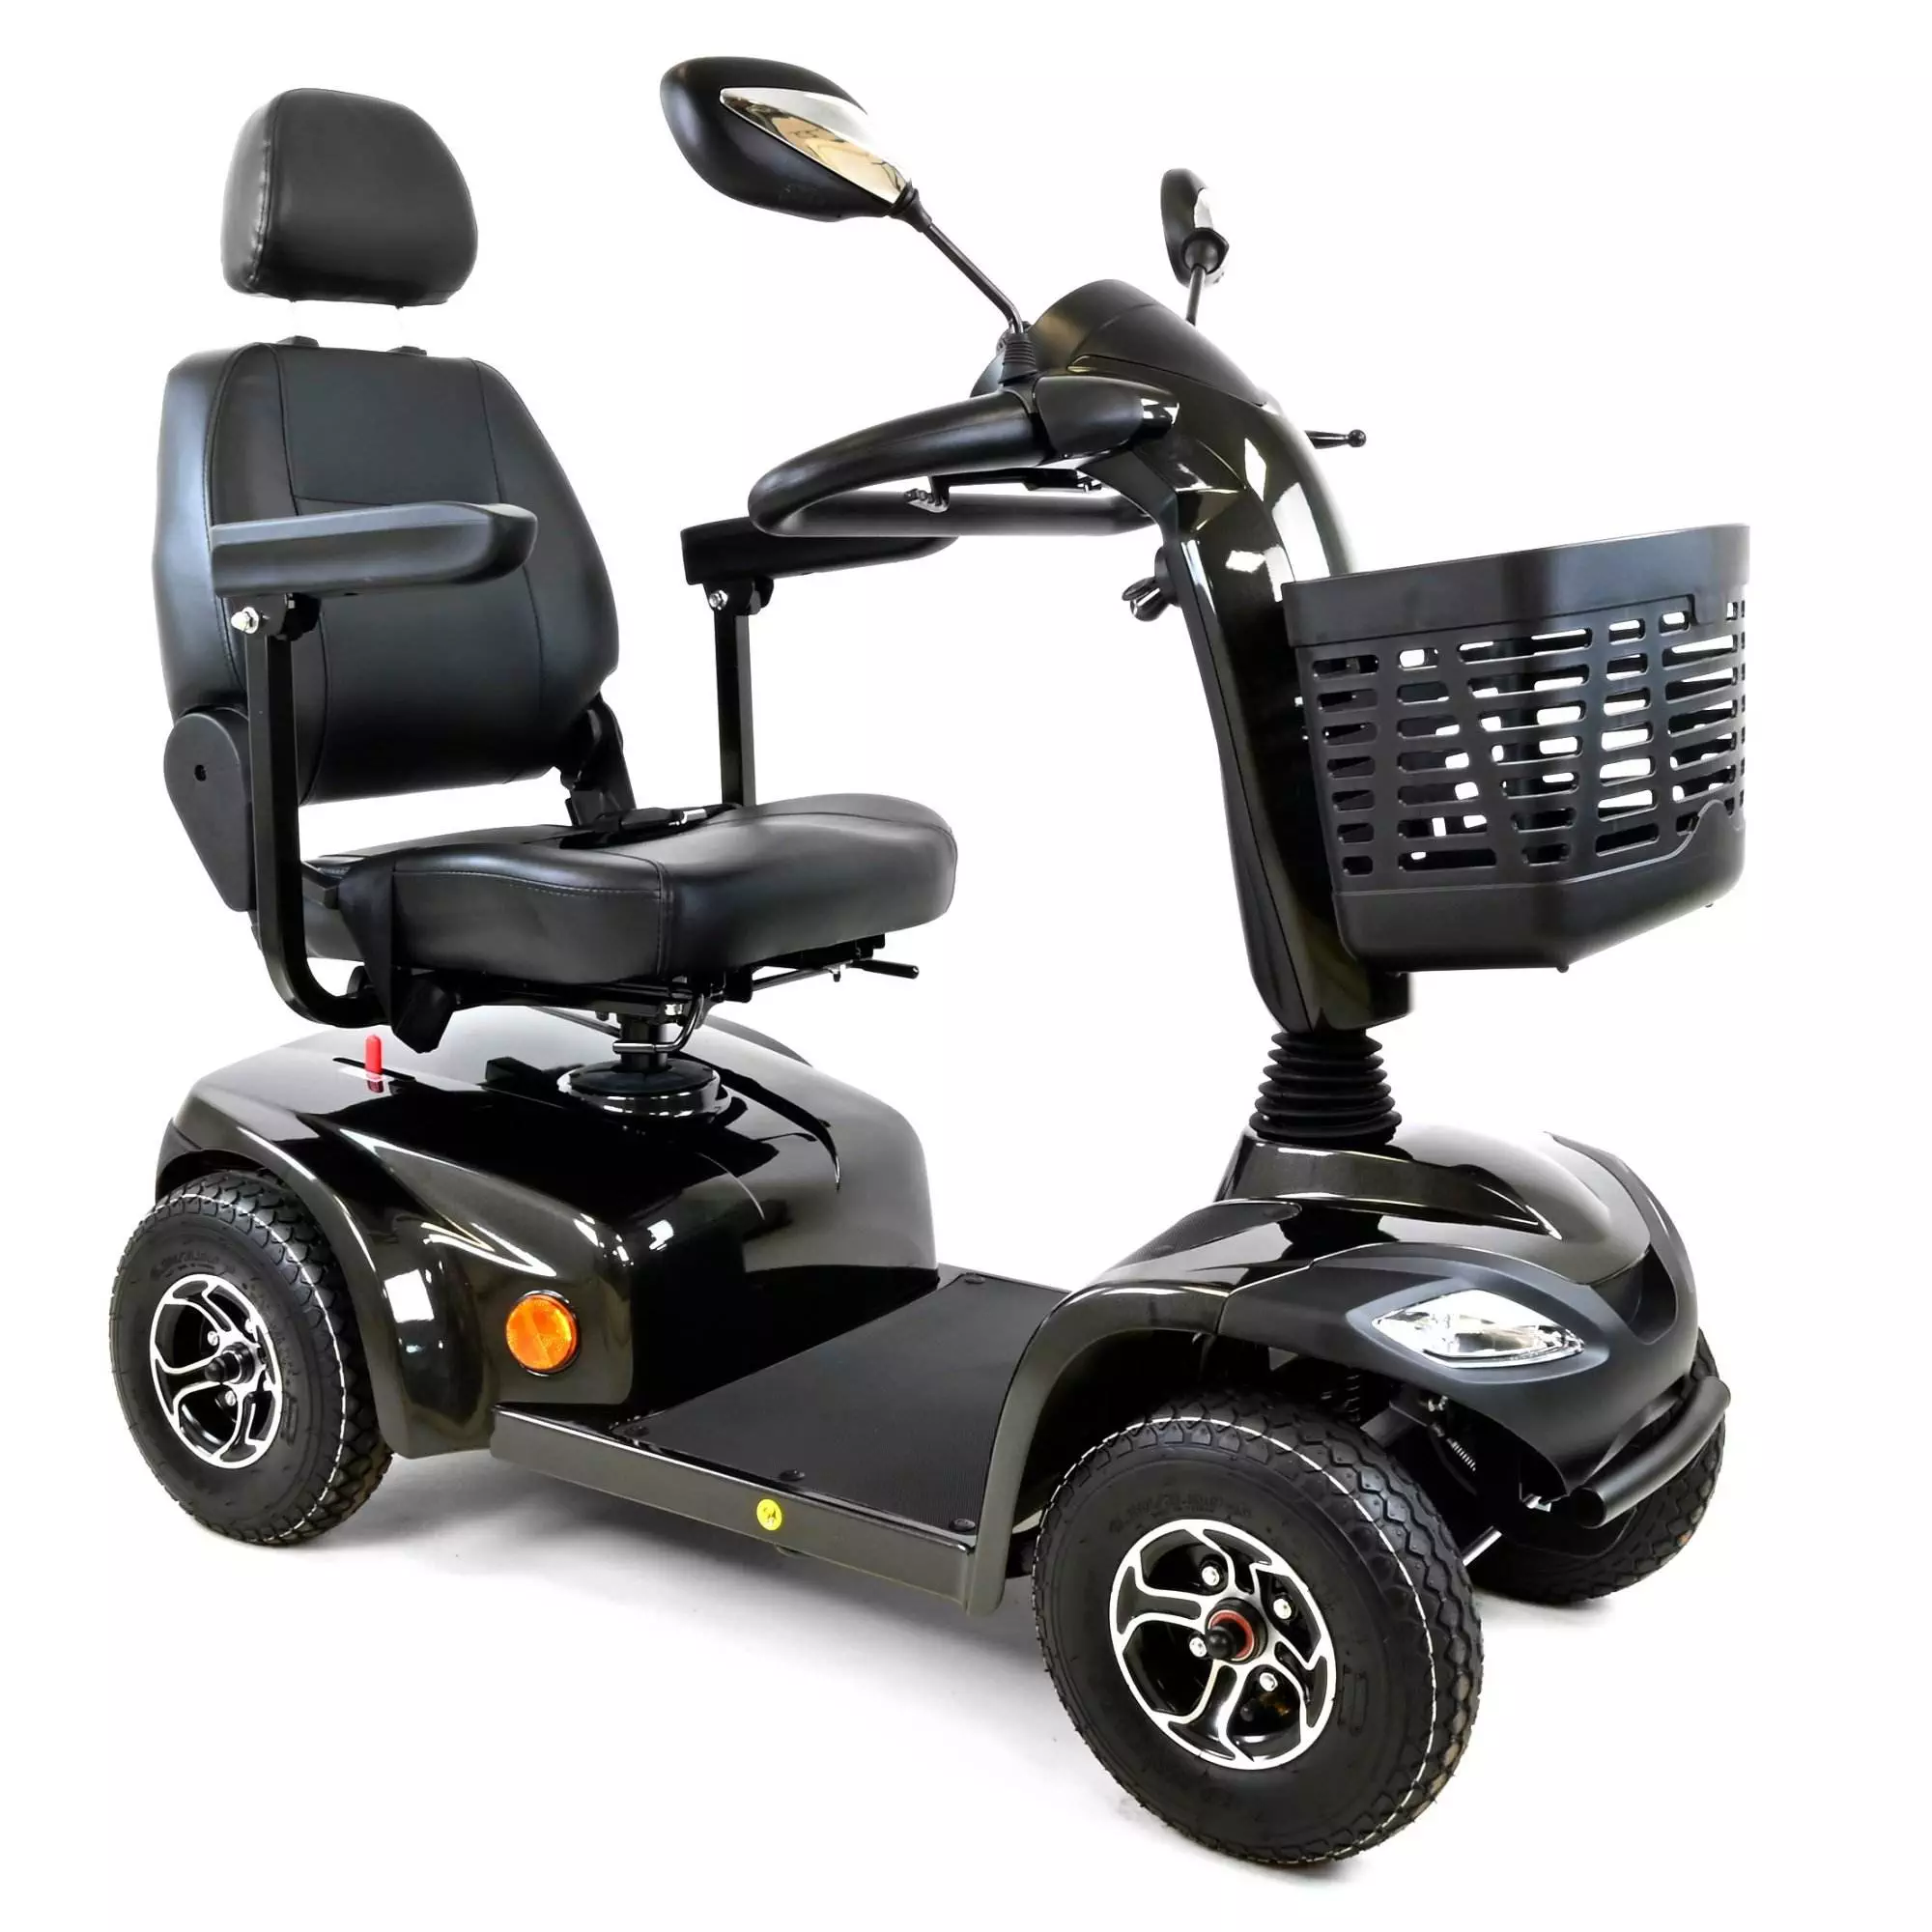 Phoenix mobility scooter in black